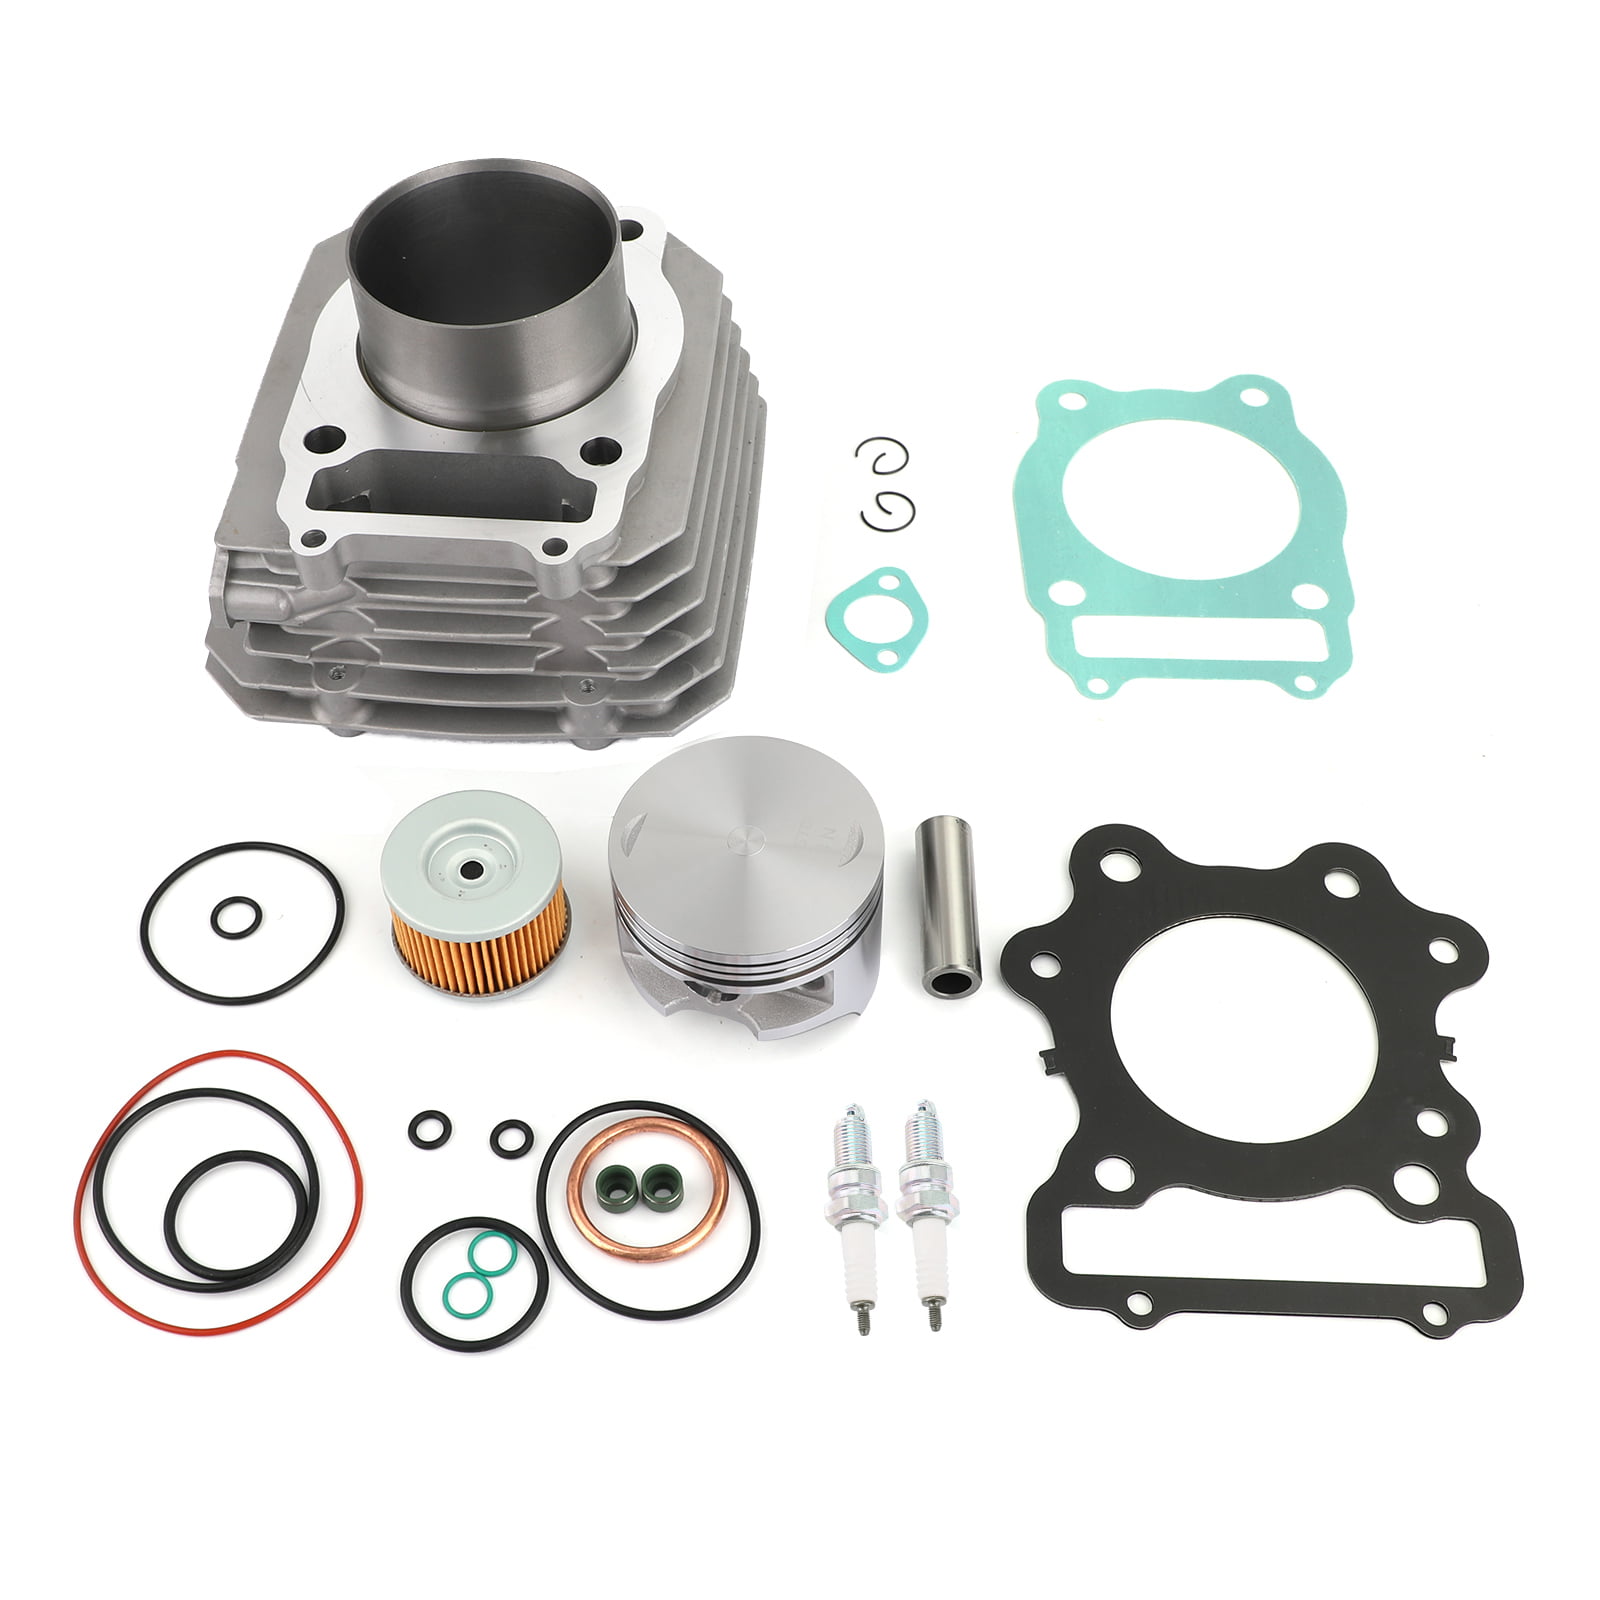 NEW COMPLETE TOP END CYLINDER KIT FOR A HONDA TRX 250 FOUR TRAX 85-87 